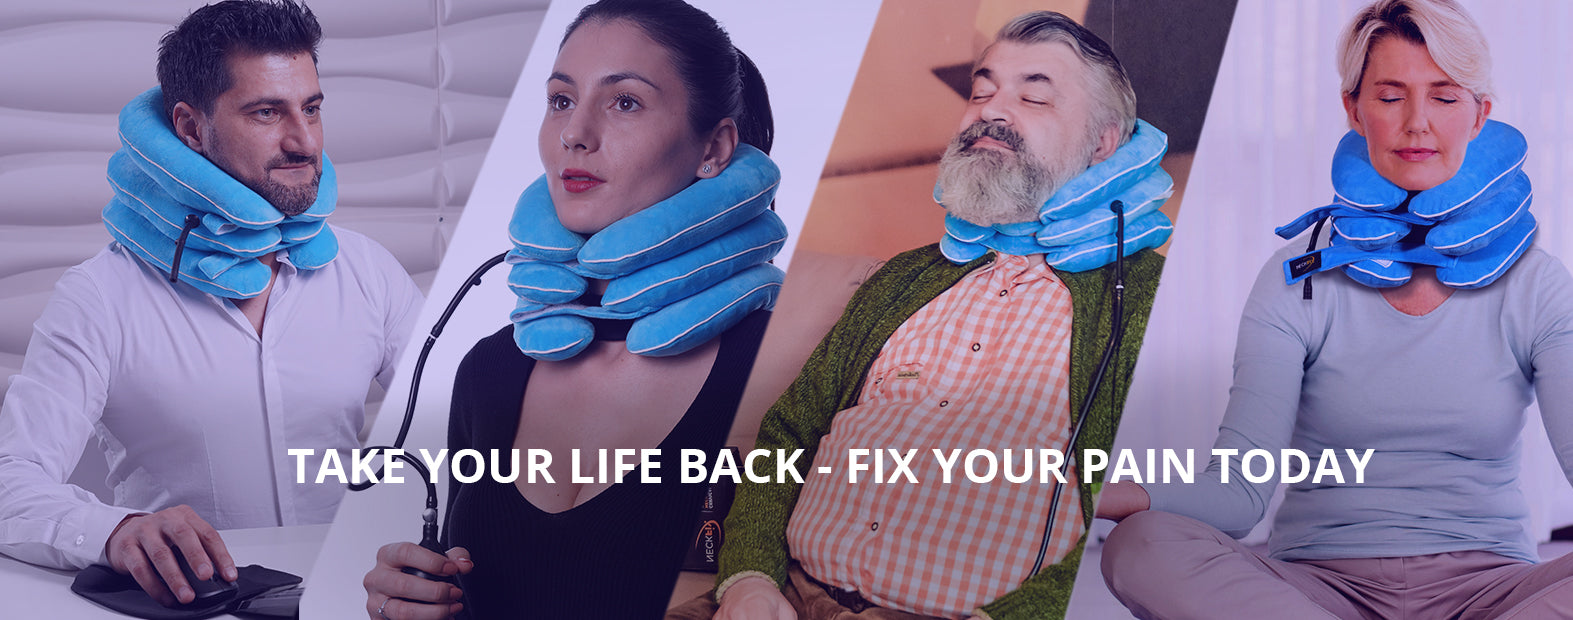 NeckFix Cervical Neck Traction Device for Instant Neck Pain Relief [FDA  Approved]